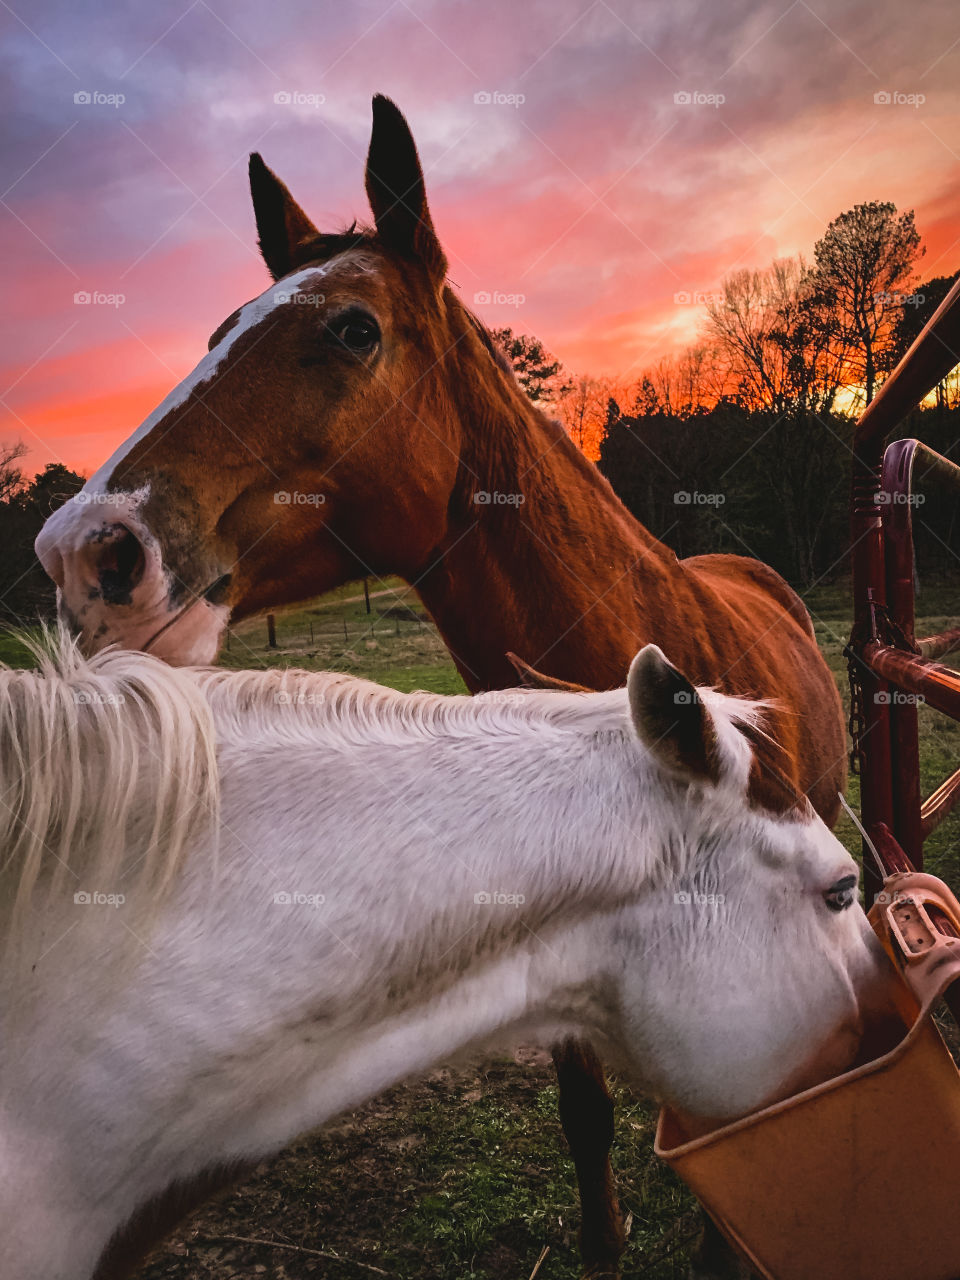 Colorful skies while feeding the horses in rural Texas